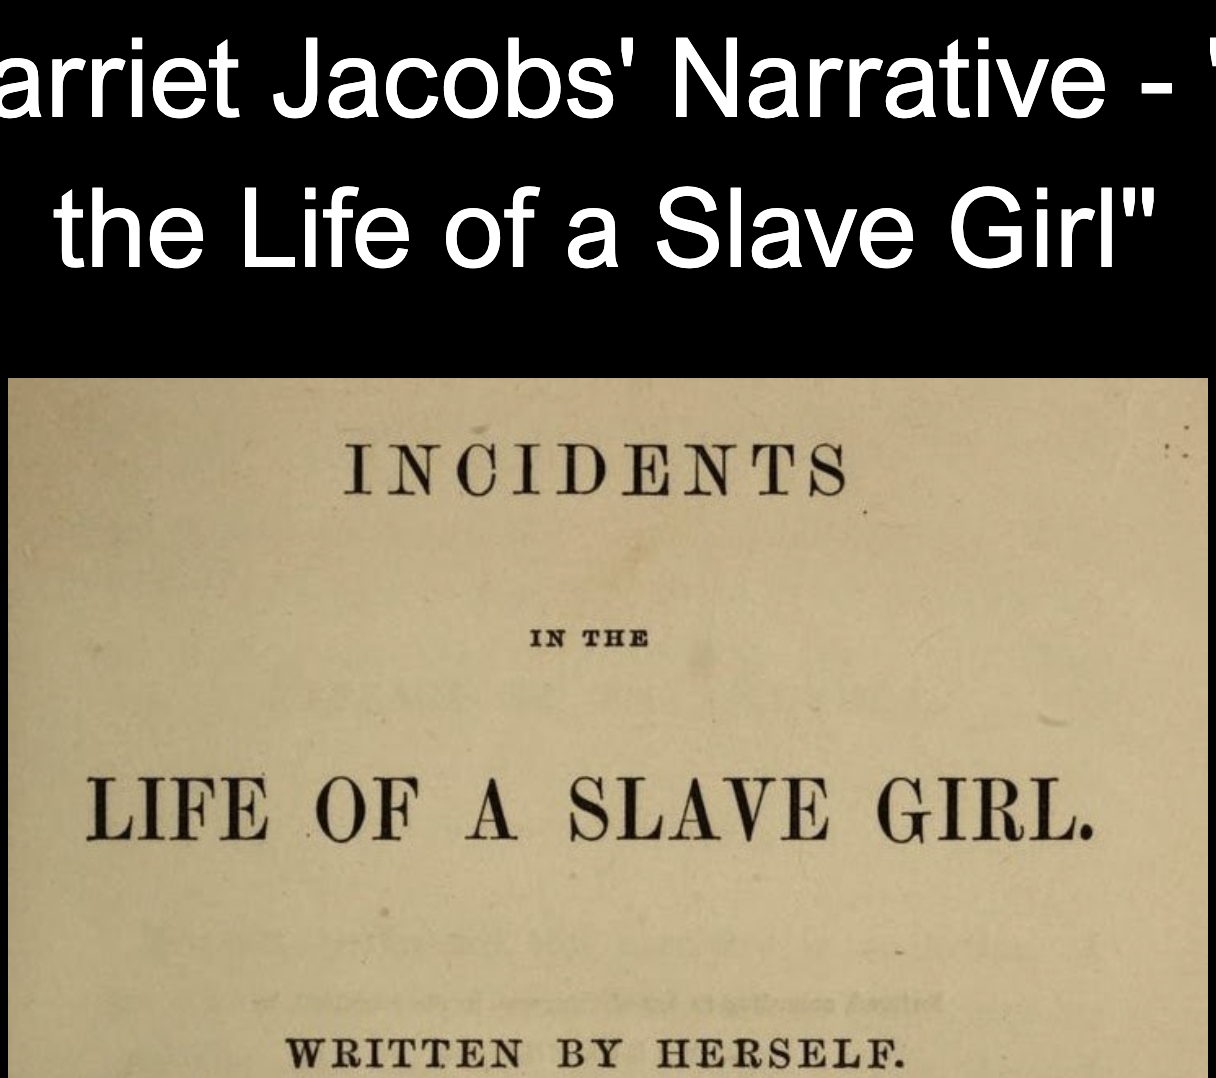 Picture of an old text, you can just read "incidents, life of a slave girl"